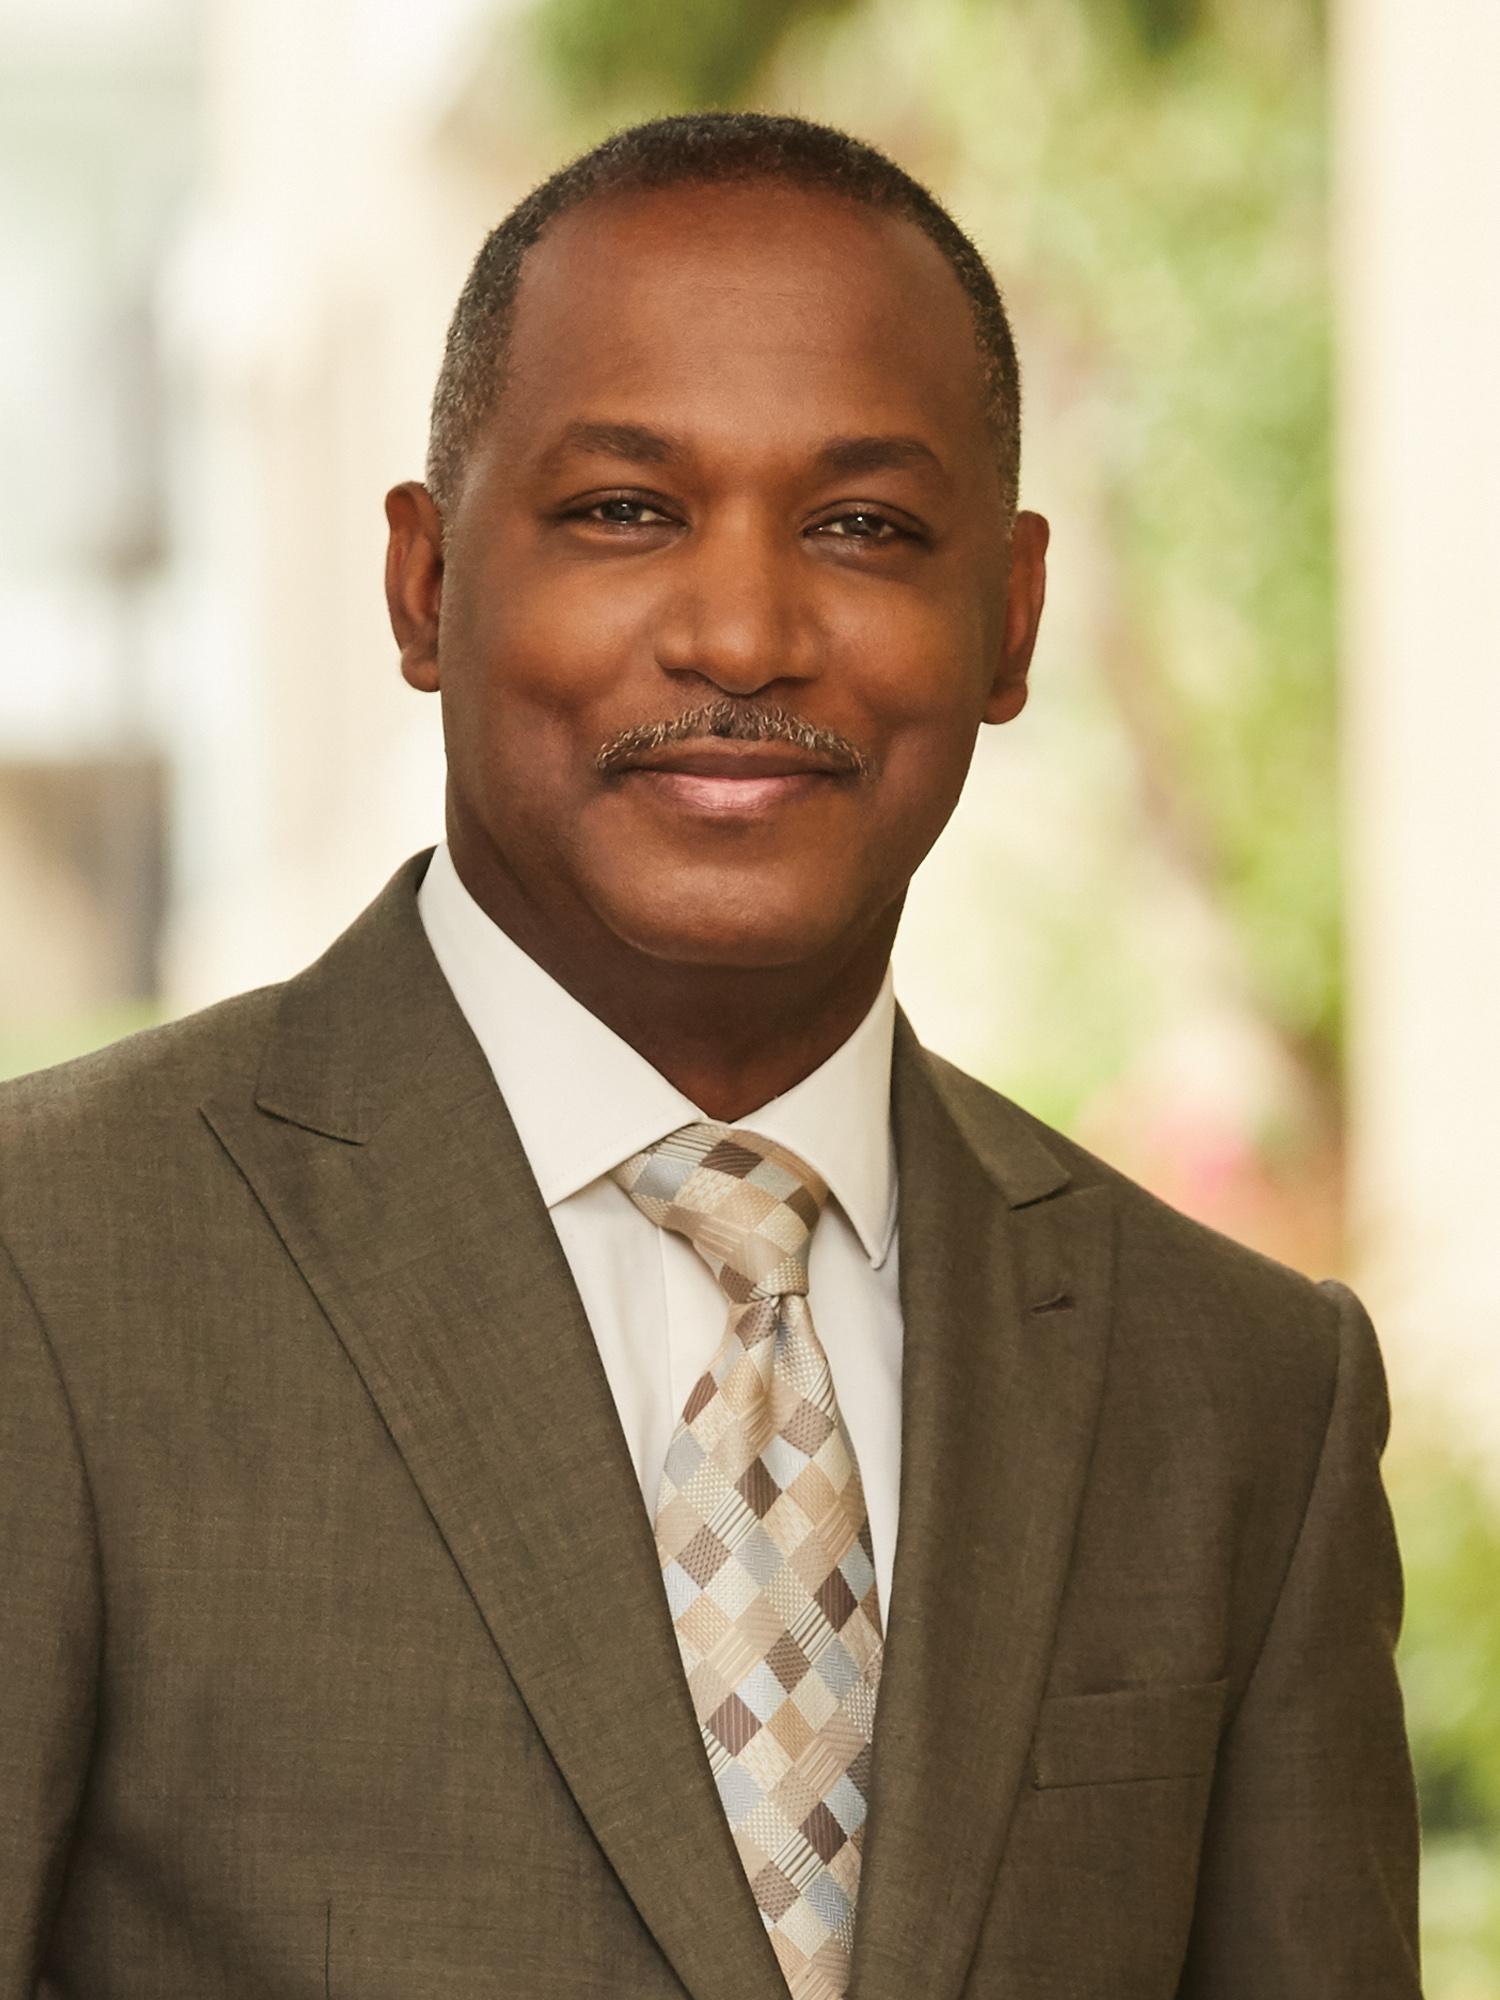 Terence Thomas | Senior Director, IT and Engineering of The Corcoran Group, a Luxury Real Estate Company